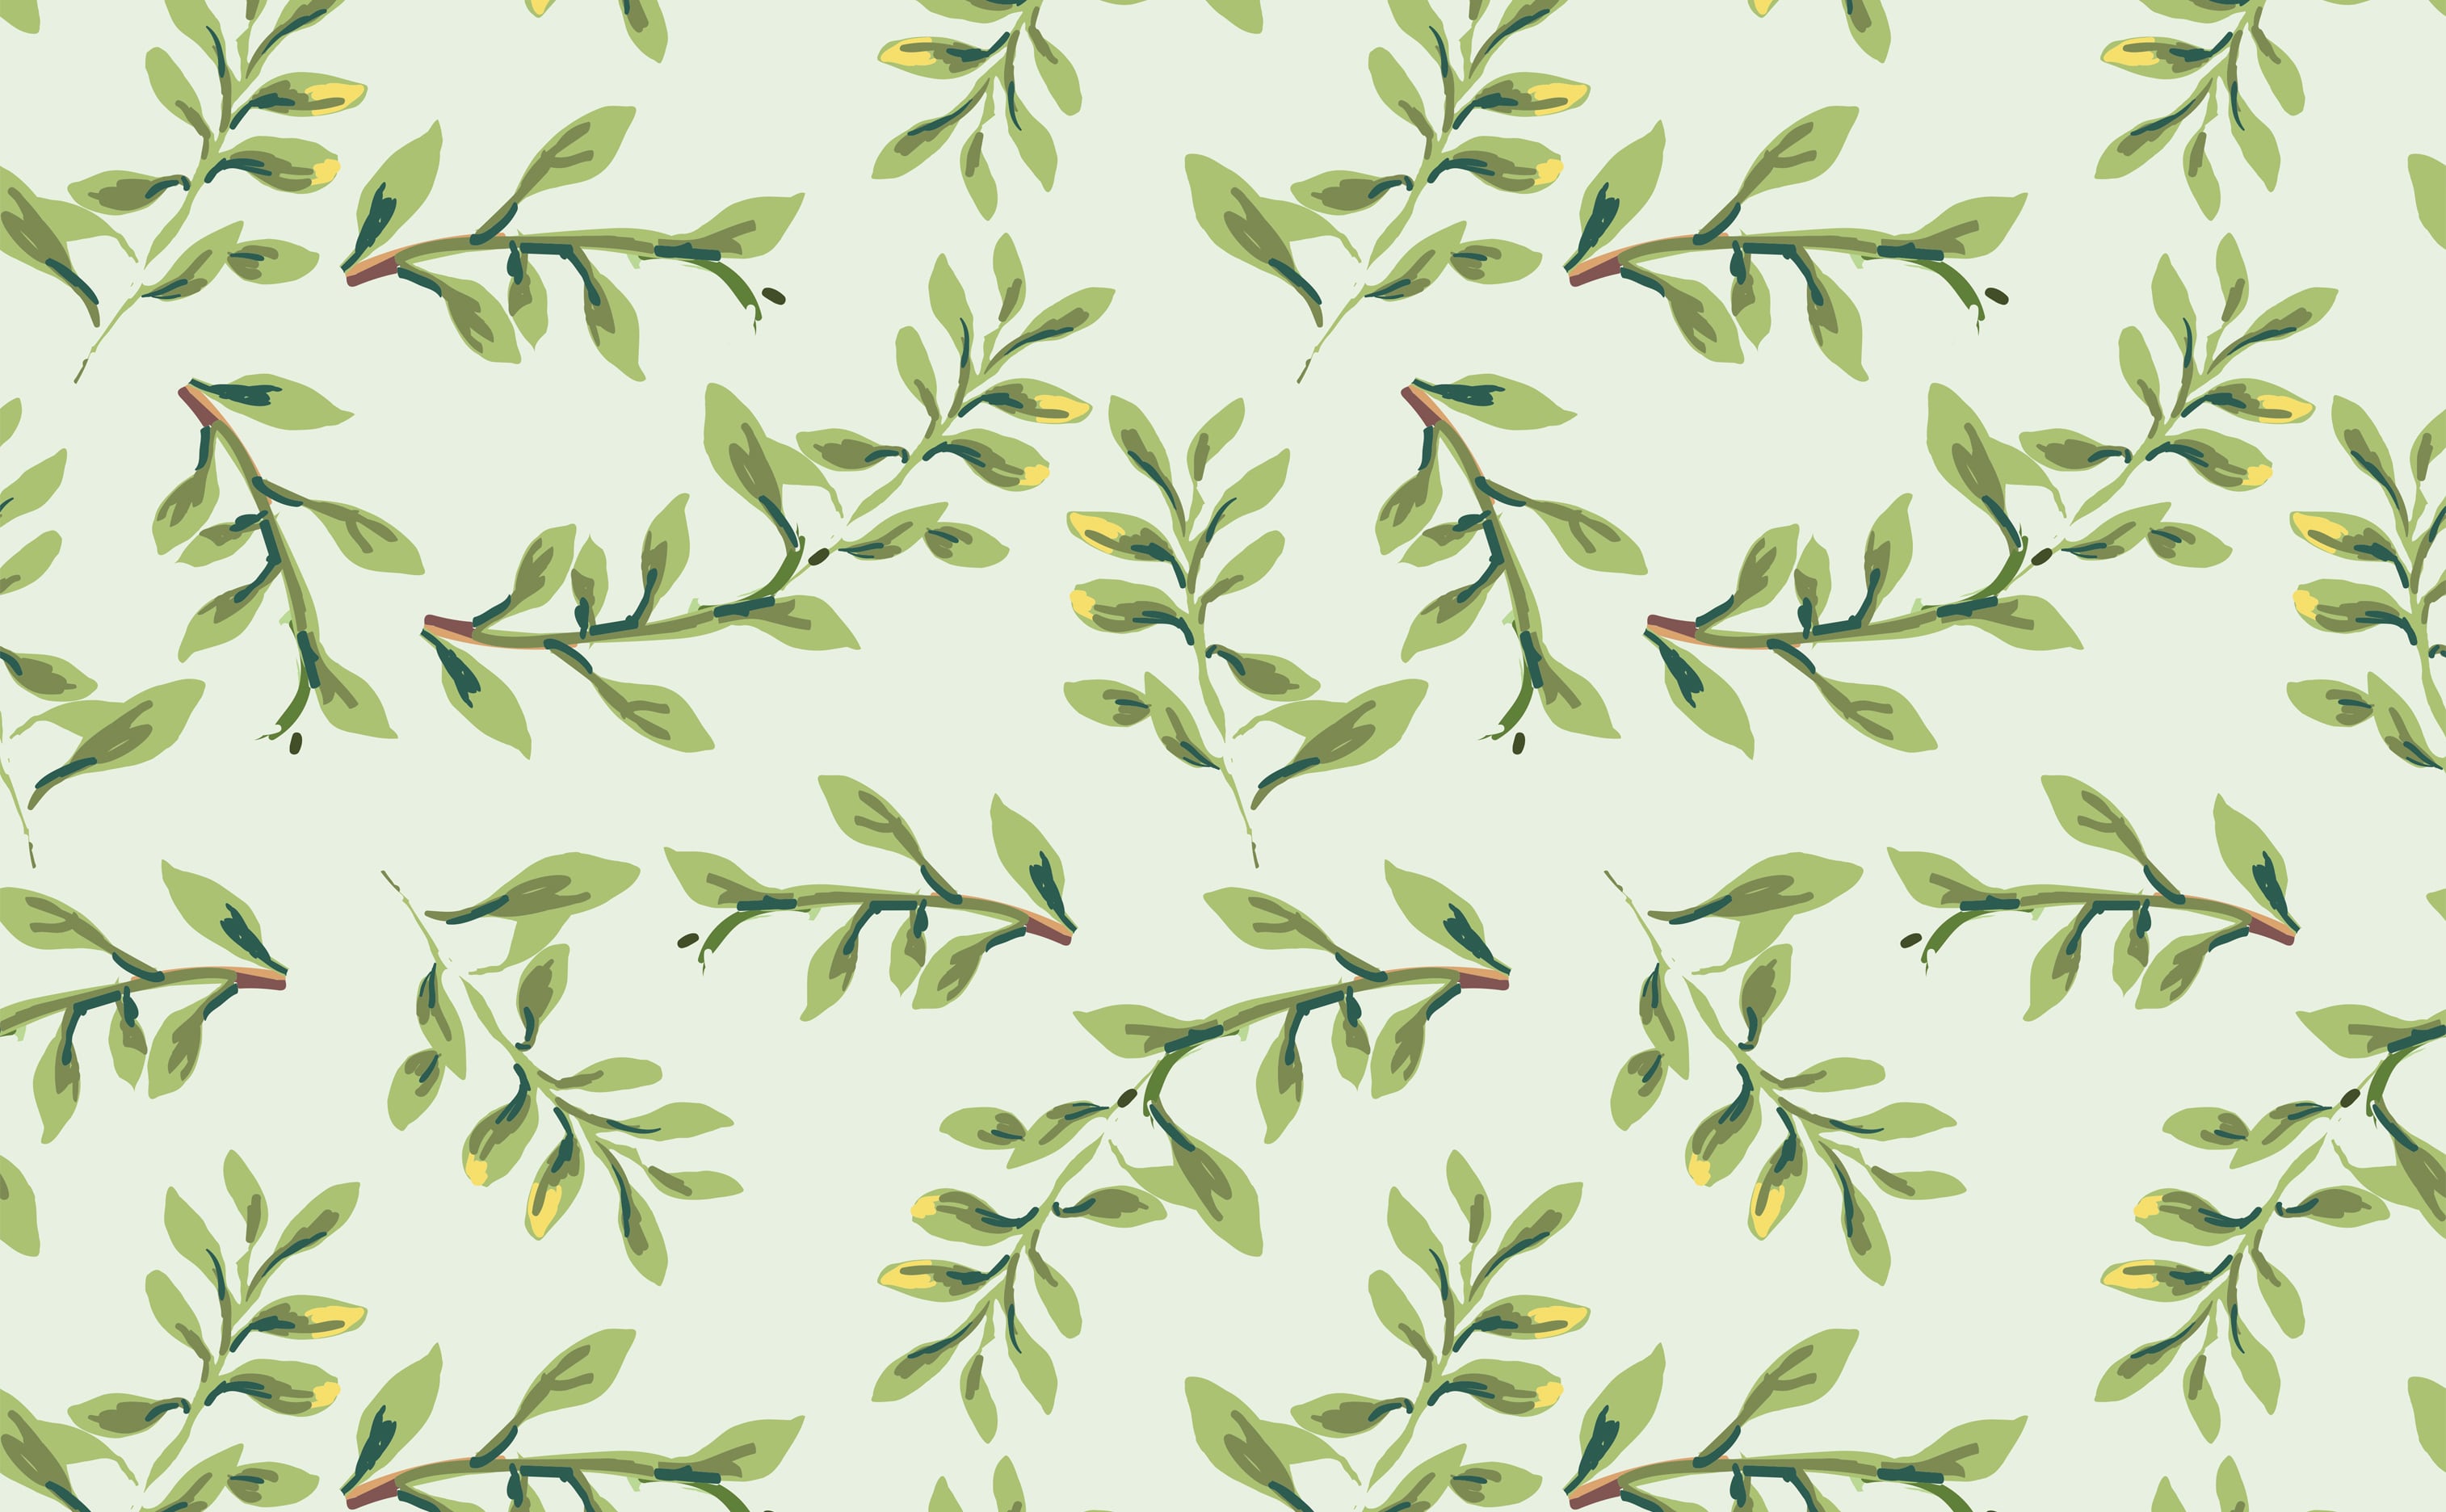 Twiggy - Sprigs Of Leaves Wallpaper